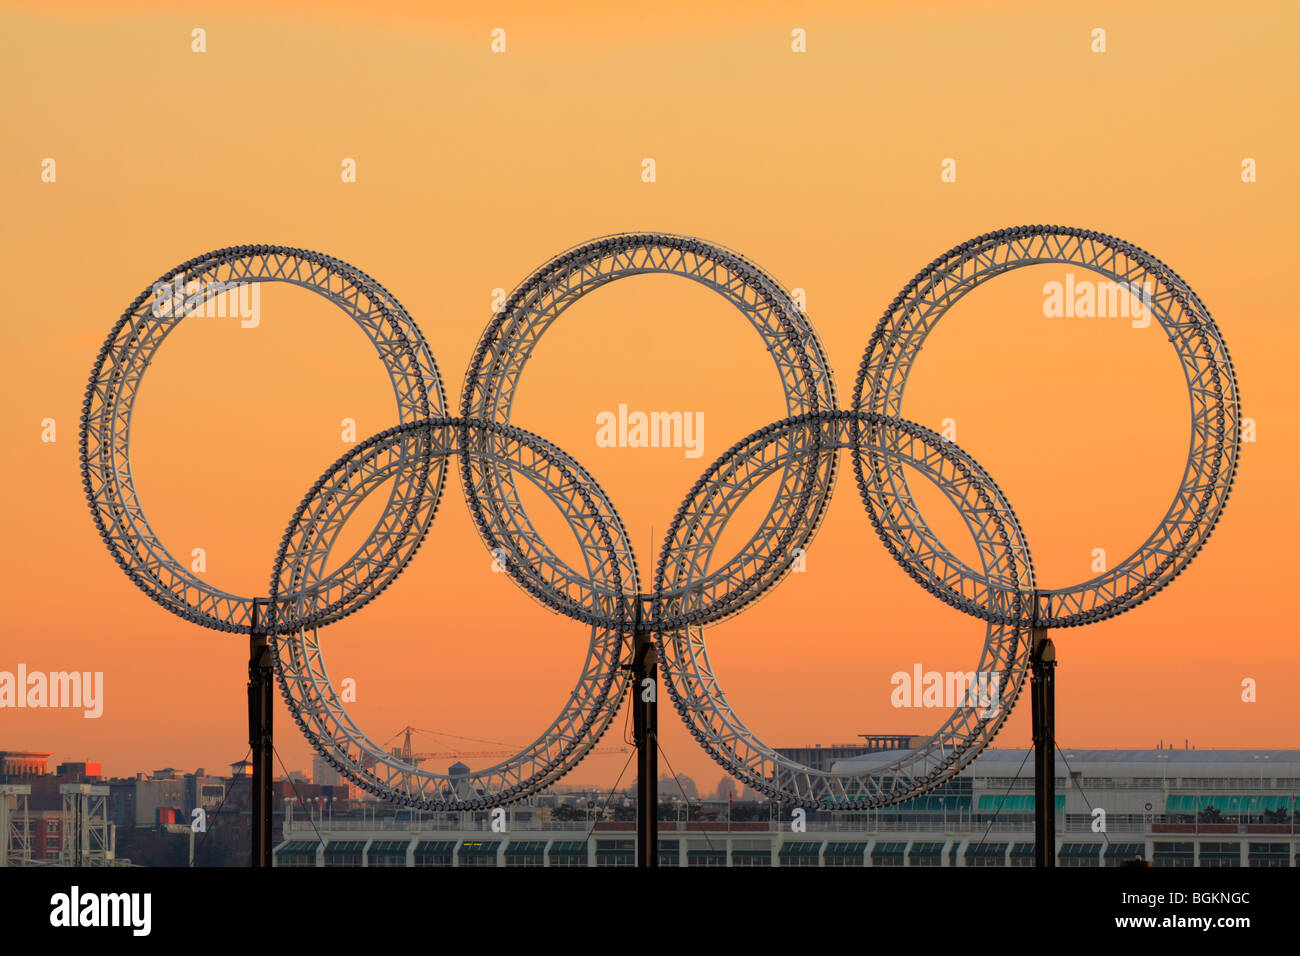 Vancouver 2010 Winter Olympic rings at sunset-Vancouver, British Columbia, Canada. Stock Photo